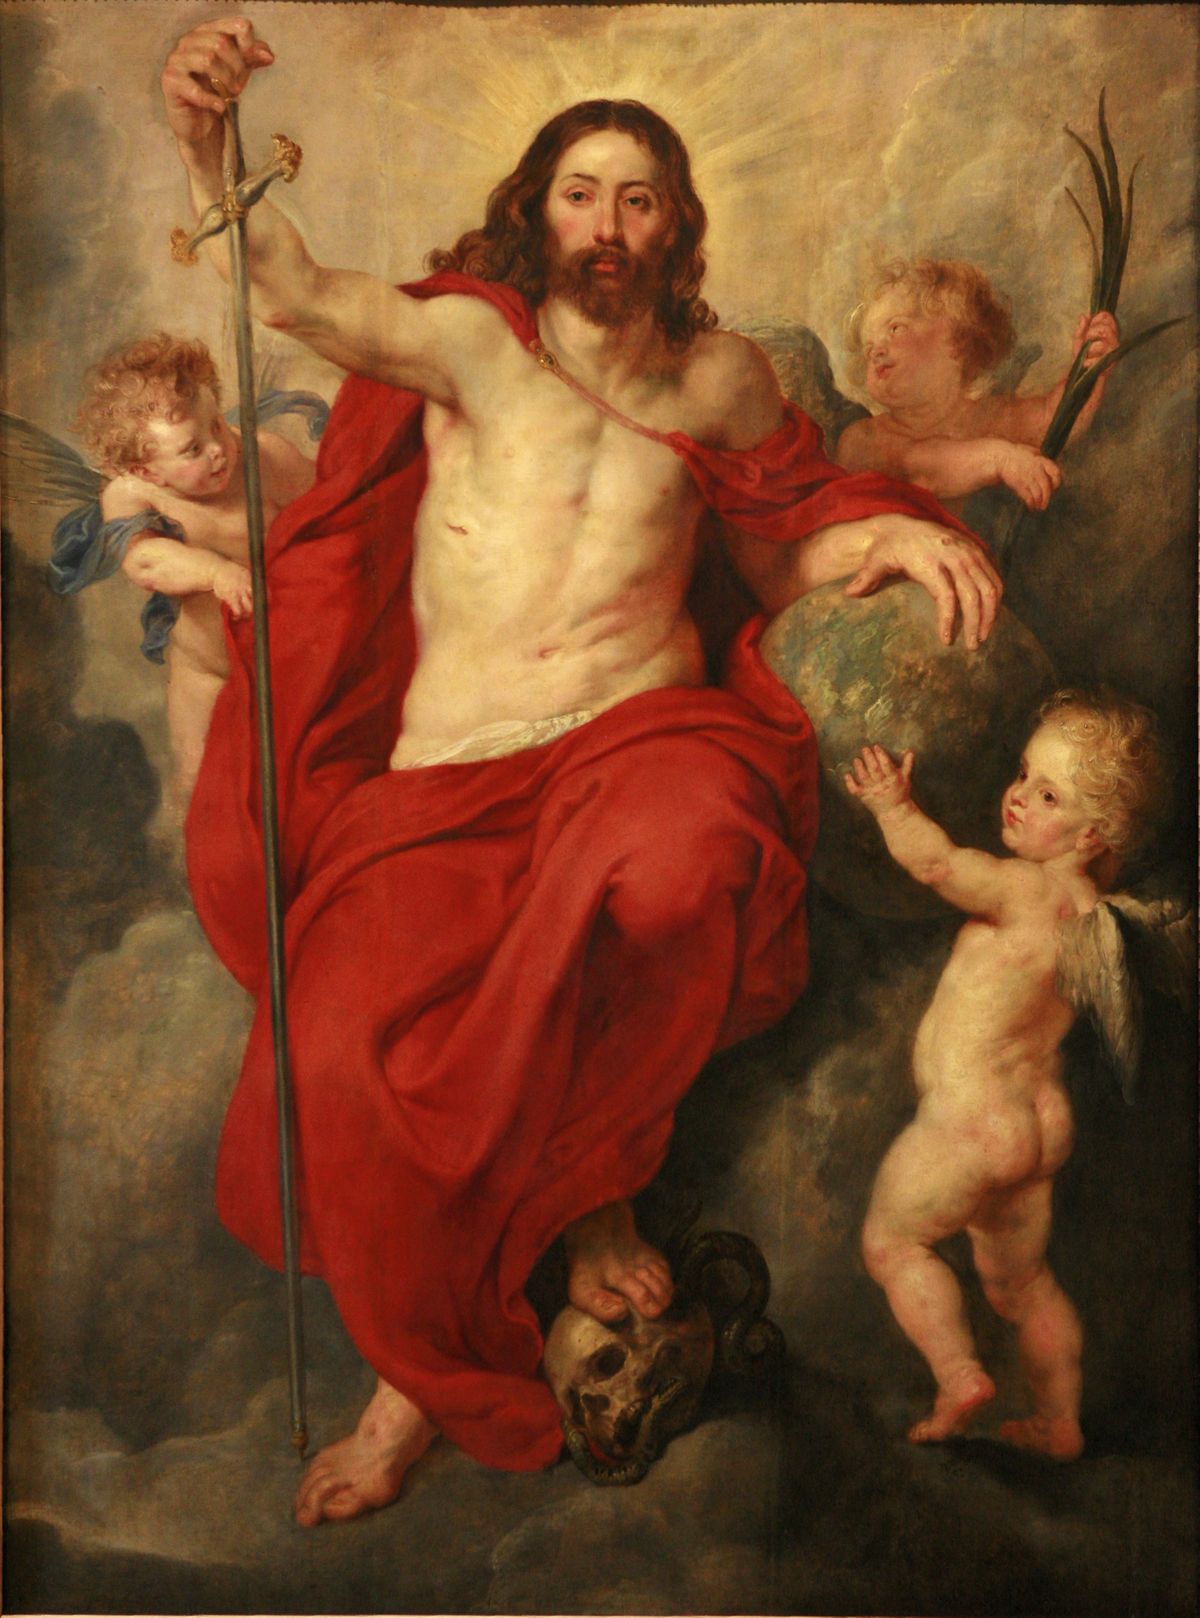 Christ Triumphant over Sin and Death by Peter Paul Rubens (1618) - Public Domain Catholic Painting